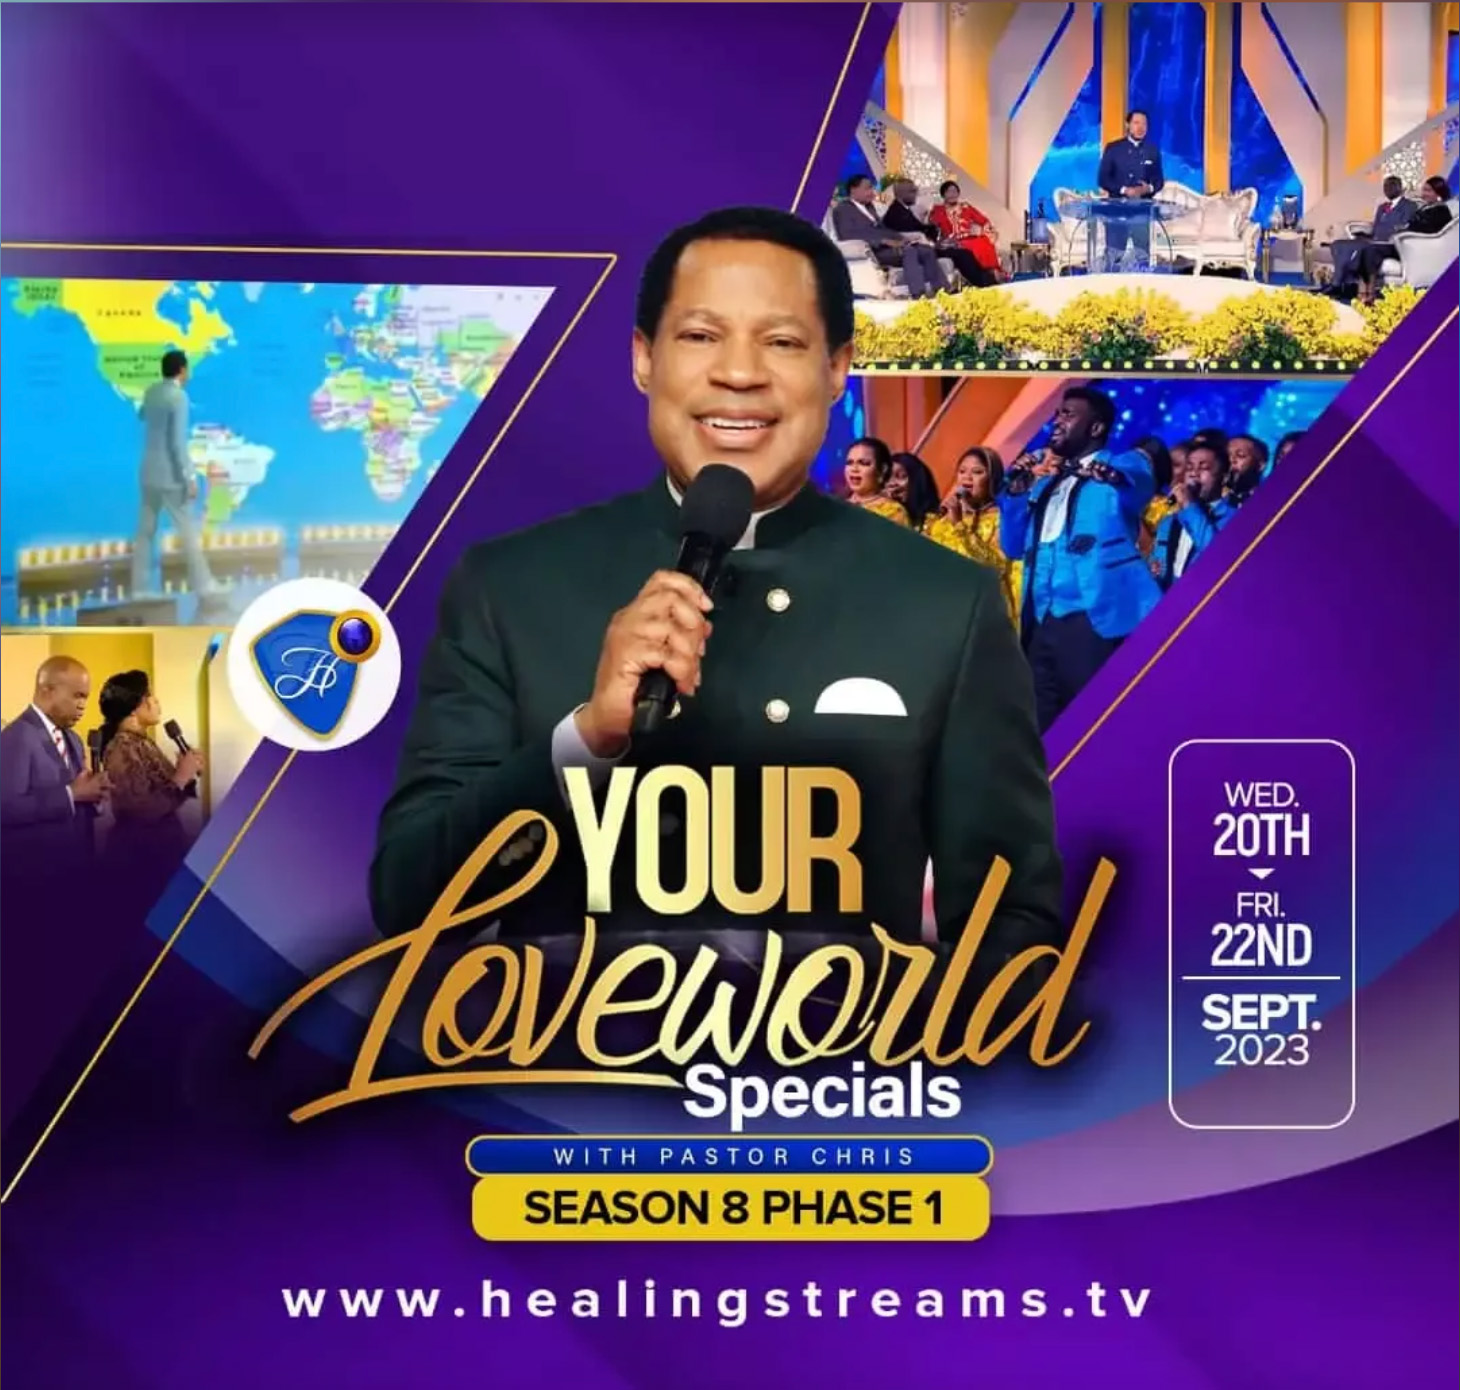 Your Loveworld Specials with Pastor Chris Season 8 Phase 1